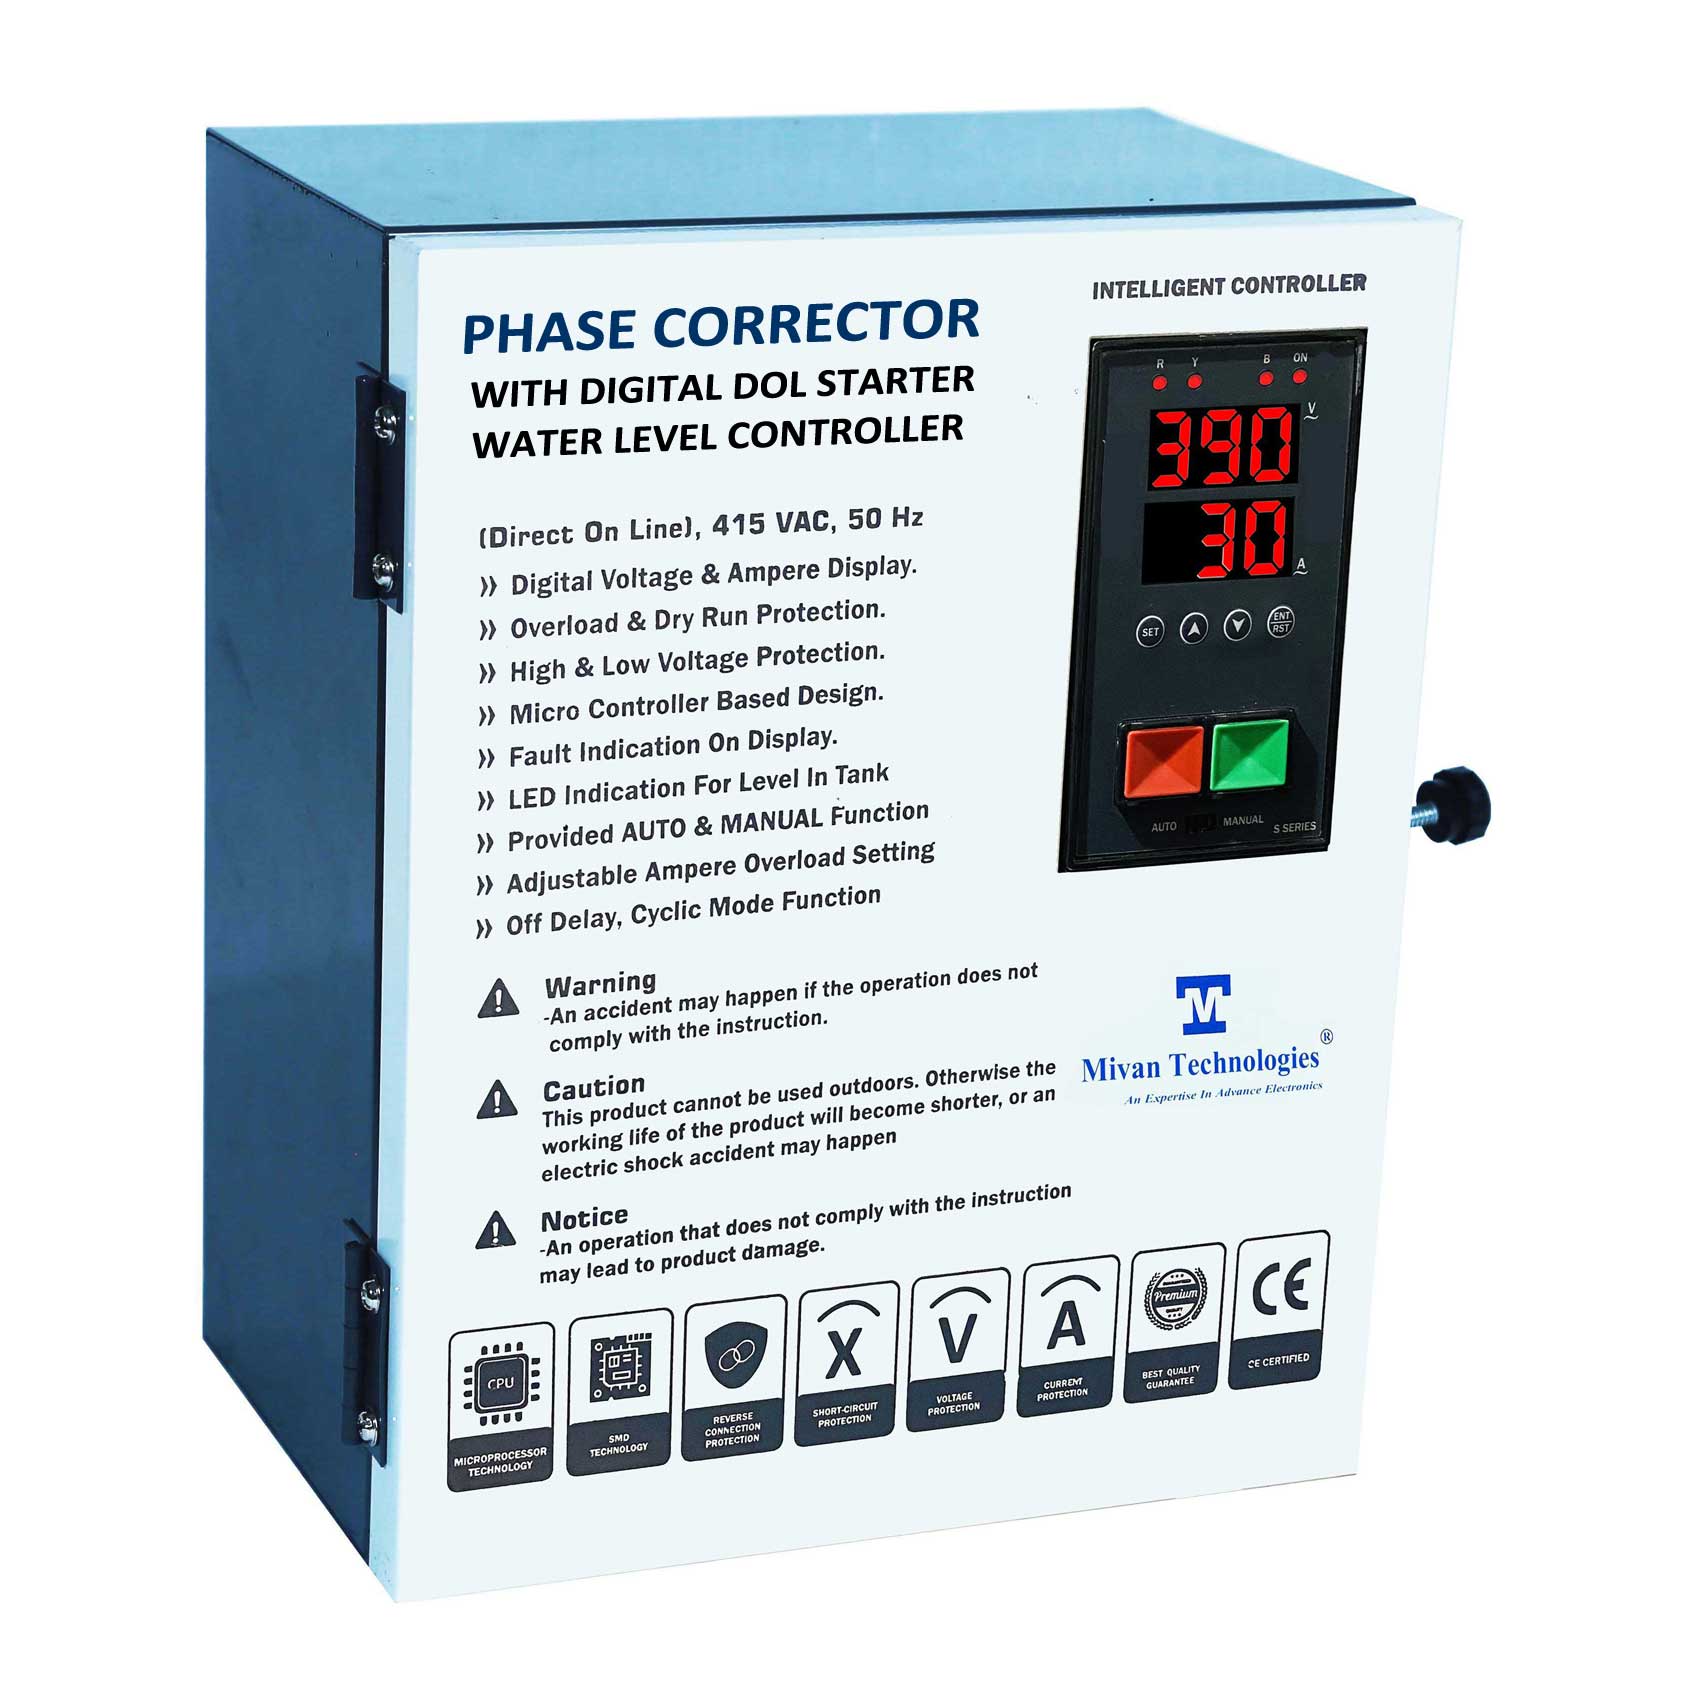 Phase corrector with water level controller with dol starter it will give correct phase sequence R Y B at output even there is not a correct sequence at input with HV LV OL DRY protection SPP and auto switch